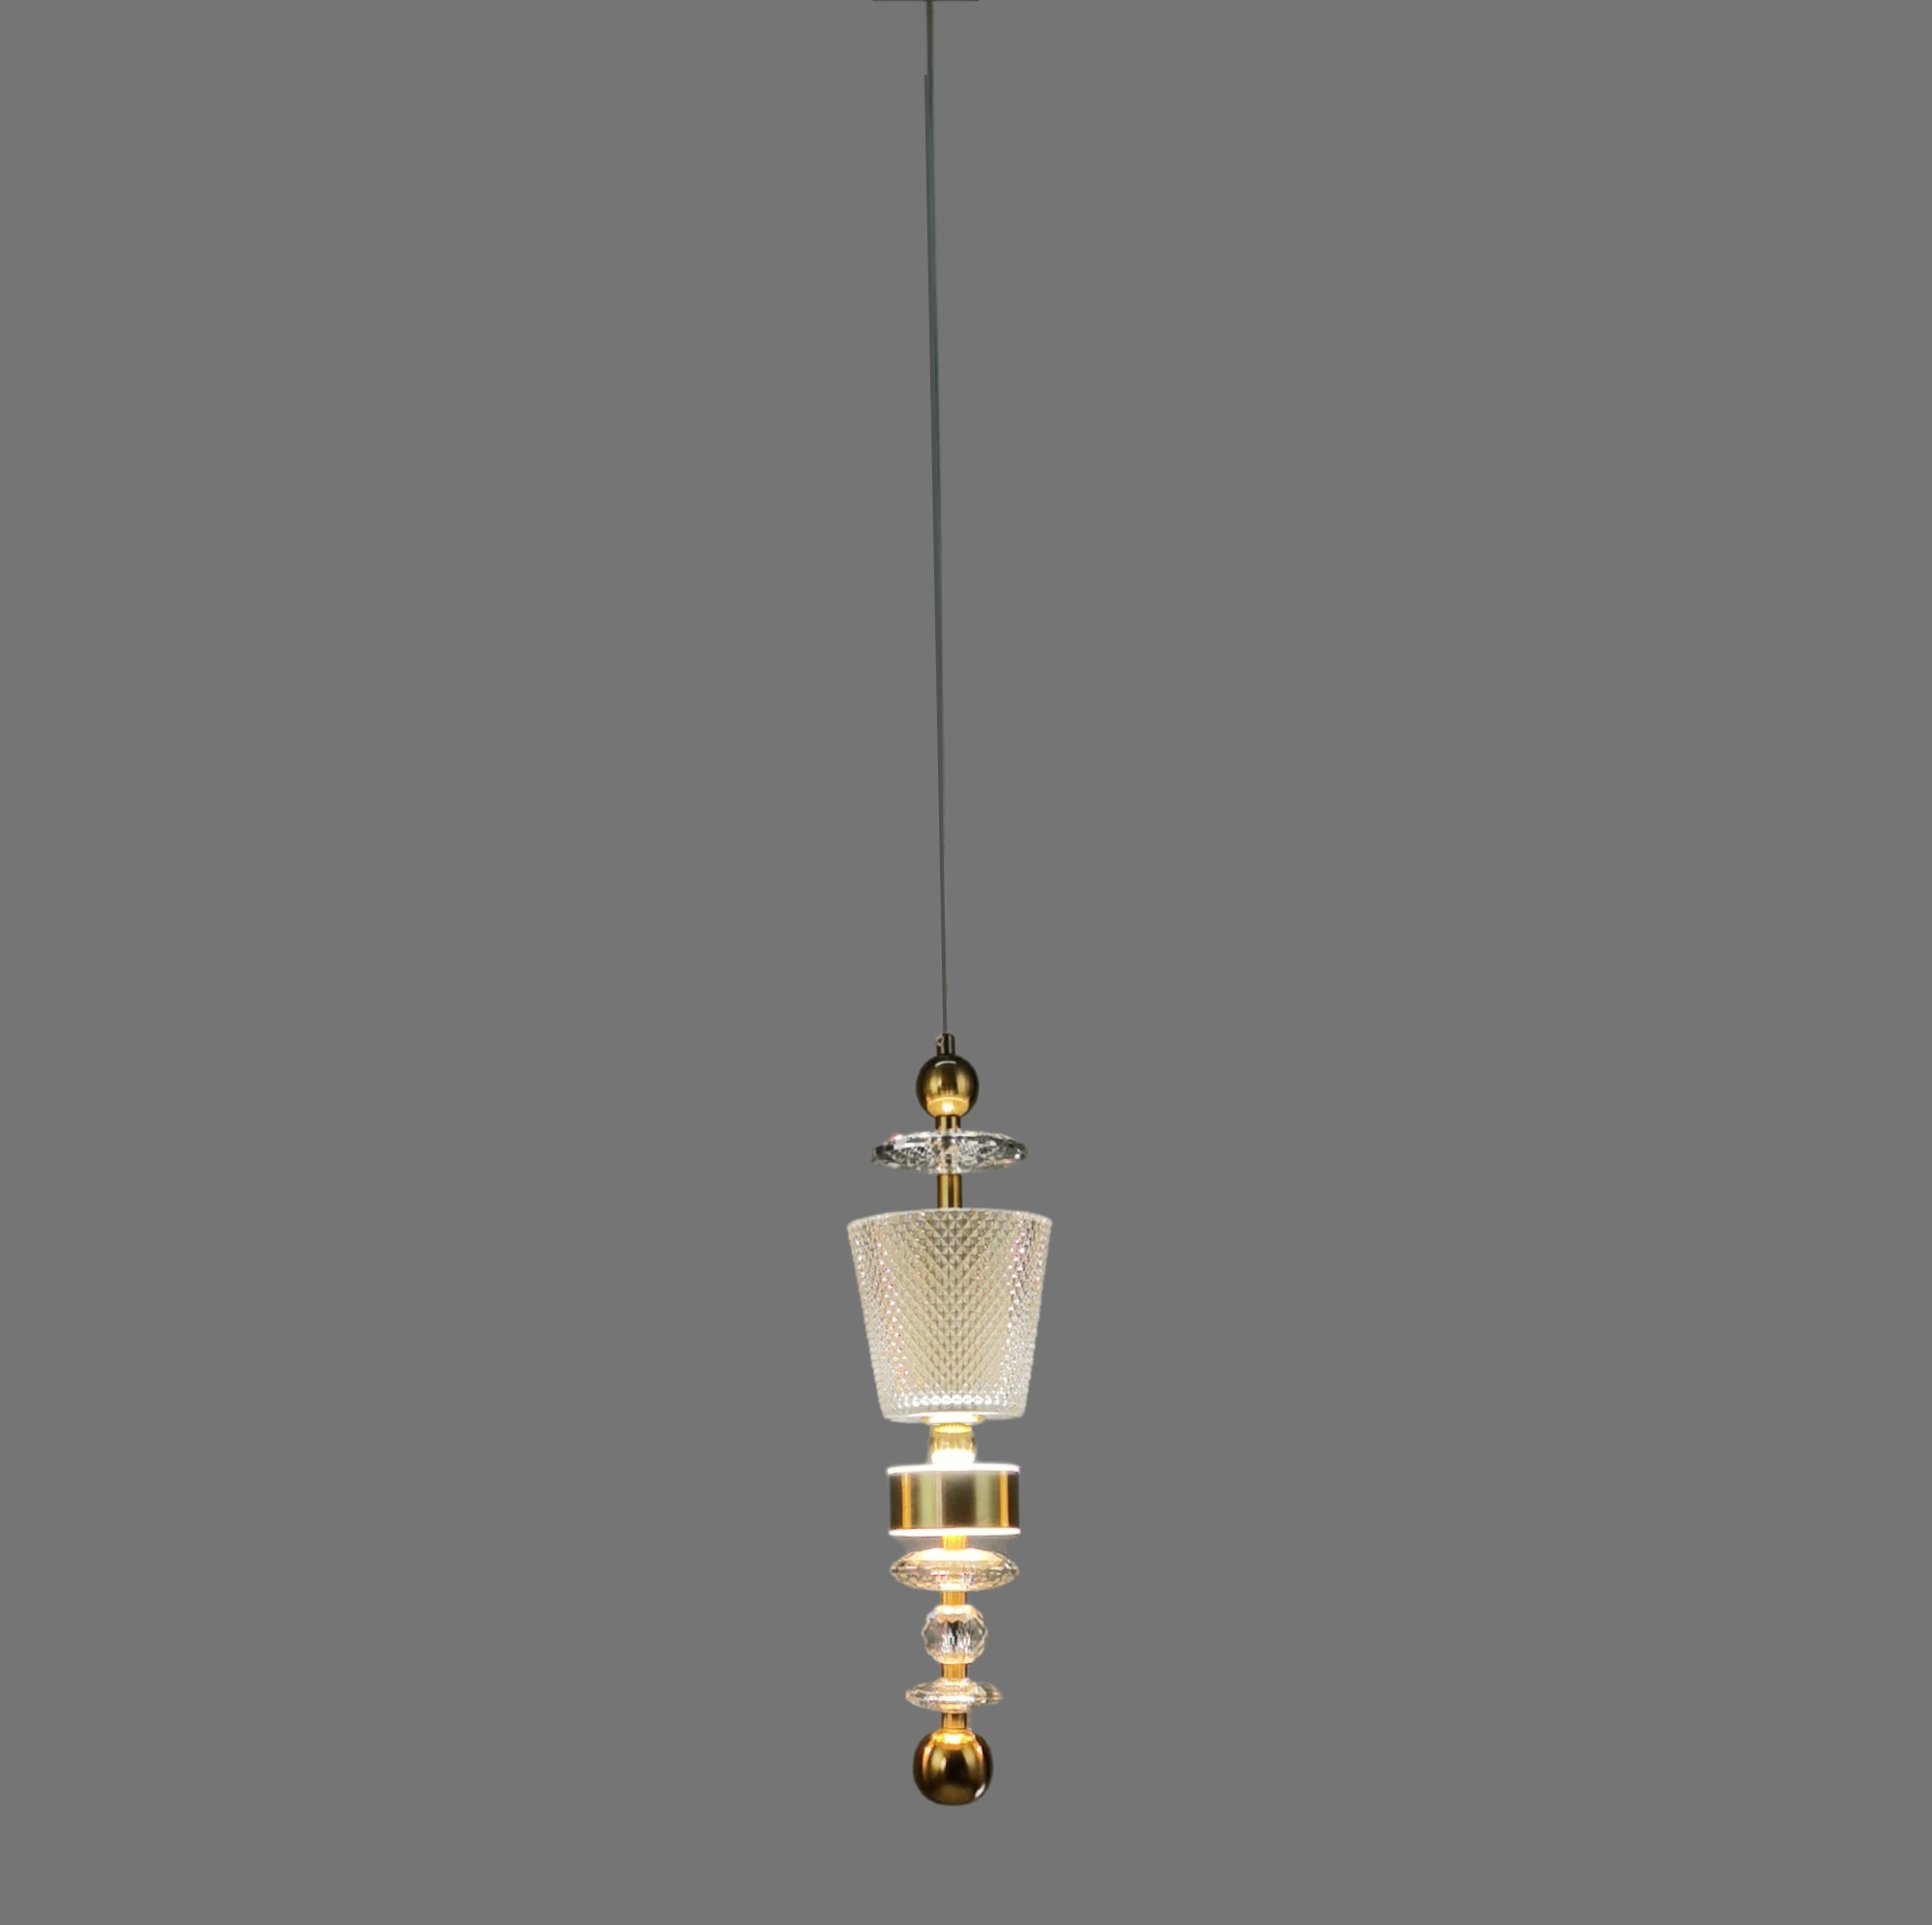 A1932/1/A3 Modern Crystal Glass Smoked Ash Pendent Light